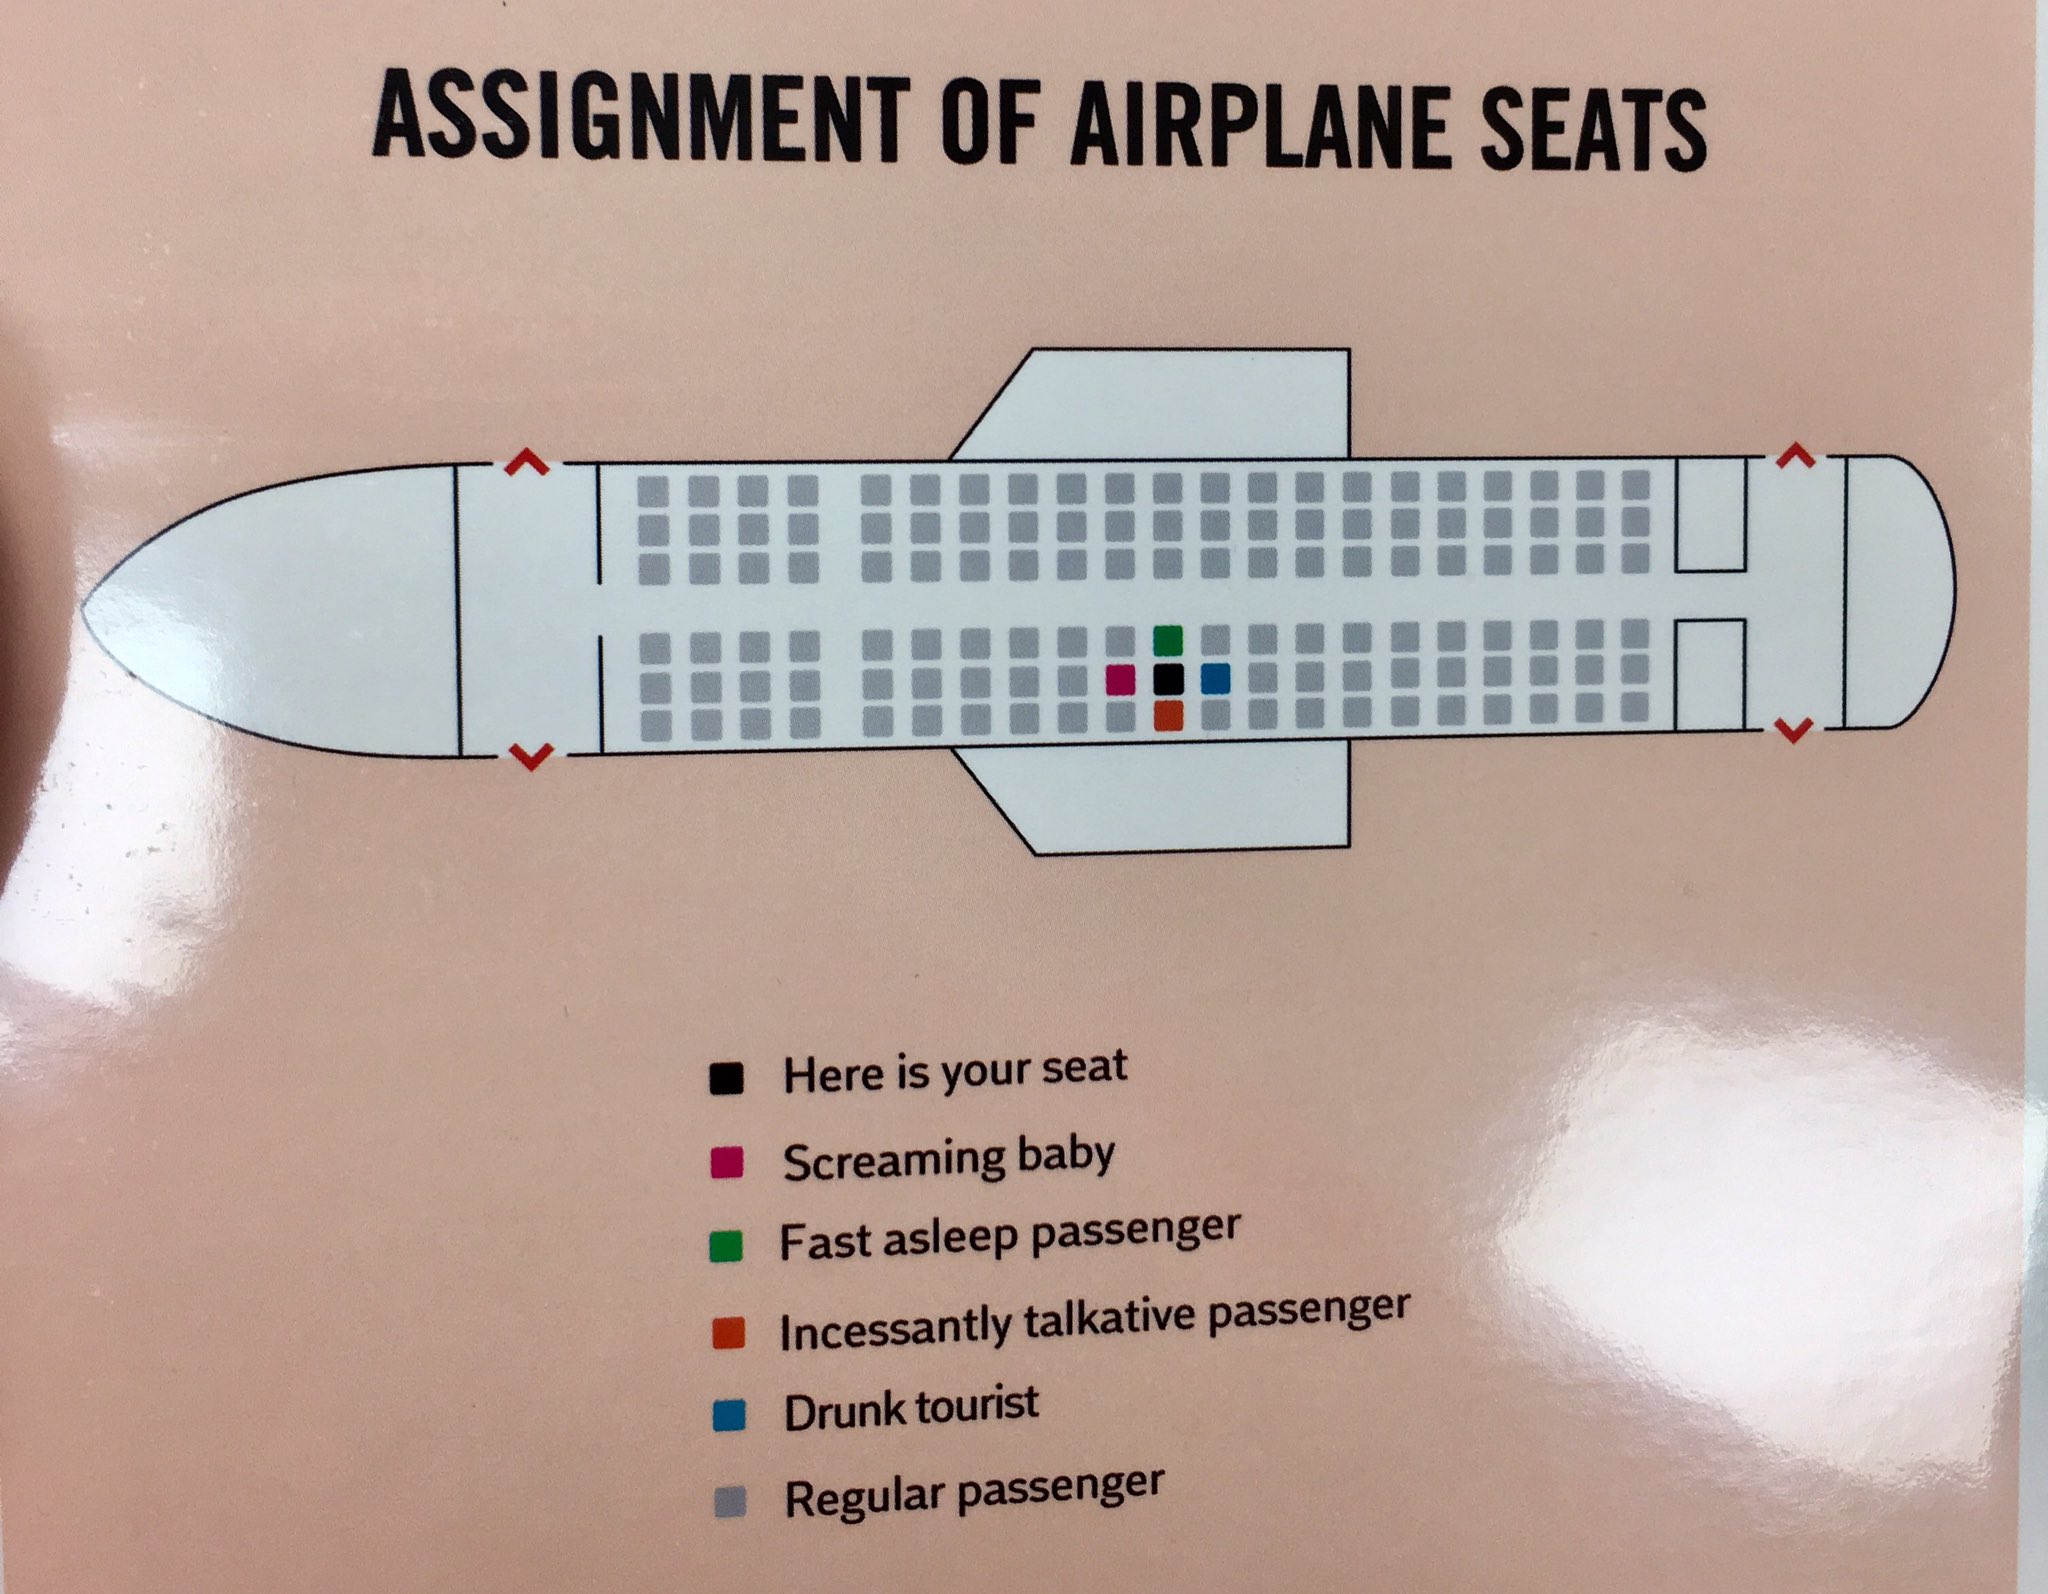 comedy birthday cards - Assignment Of Airplane Seats Here is your seat Screaming baby Fast asleep passenger Incessantly talkative passenger Drunk tourist Regular passenger